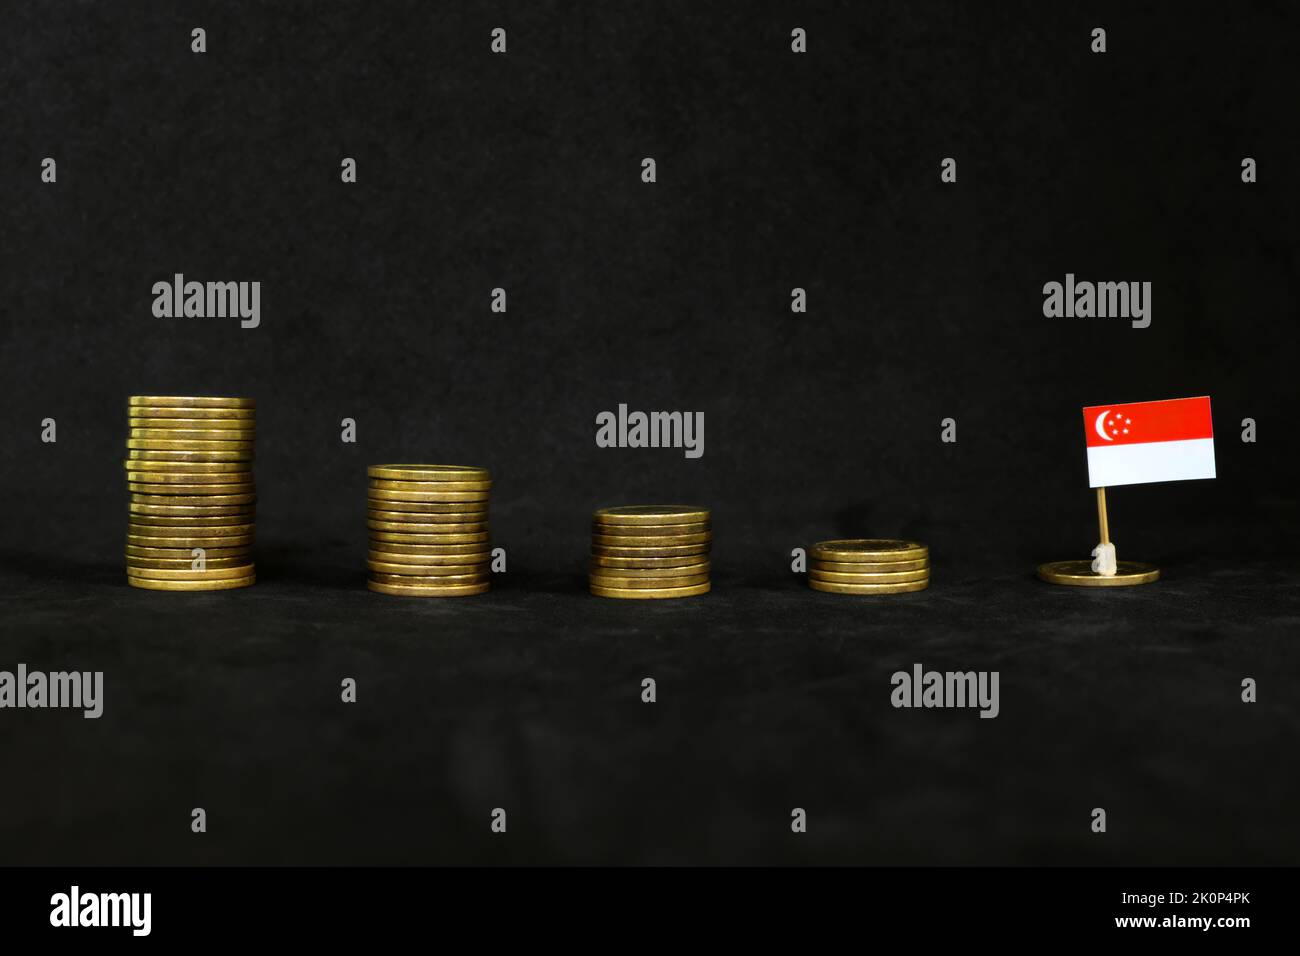 Singapore economic recession, financial crisis and currency depreciation concept. Singaporean flag in decreasing stack of coins in dark black Stock Photo